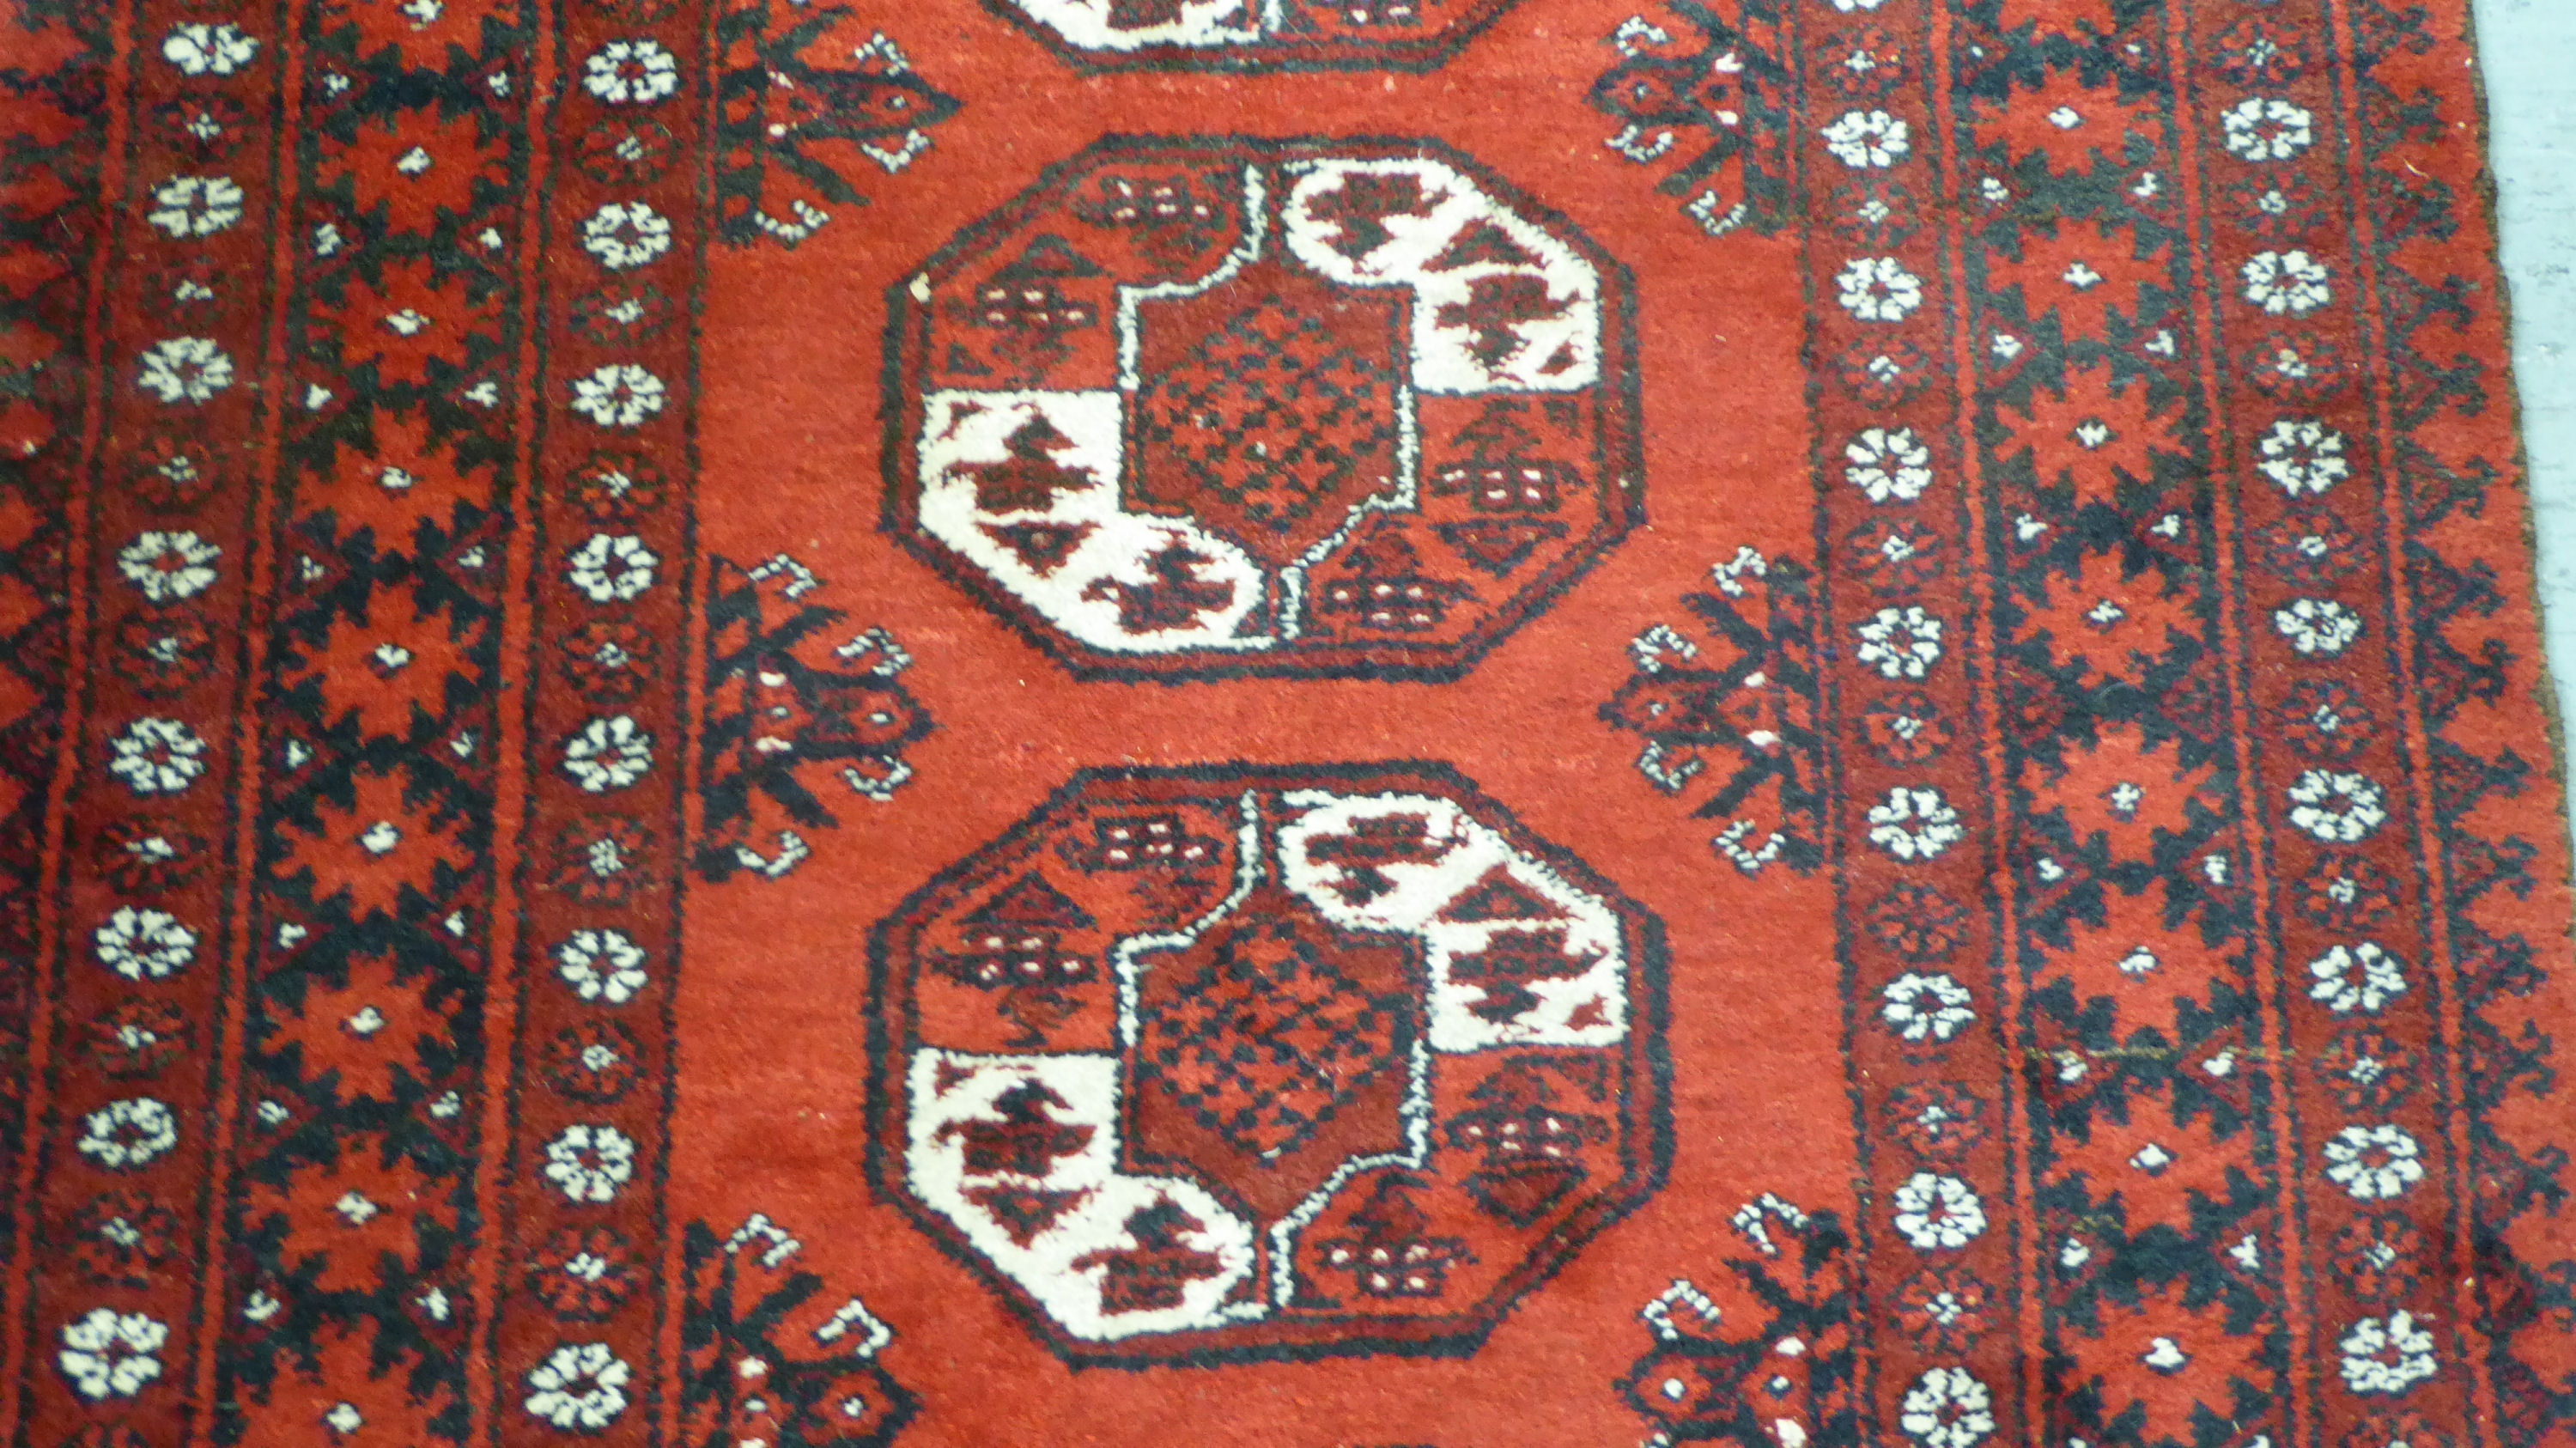 A Bokhara rug with elephant foot motifs, - Image 2 of 3